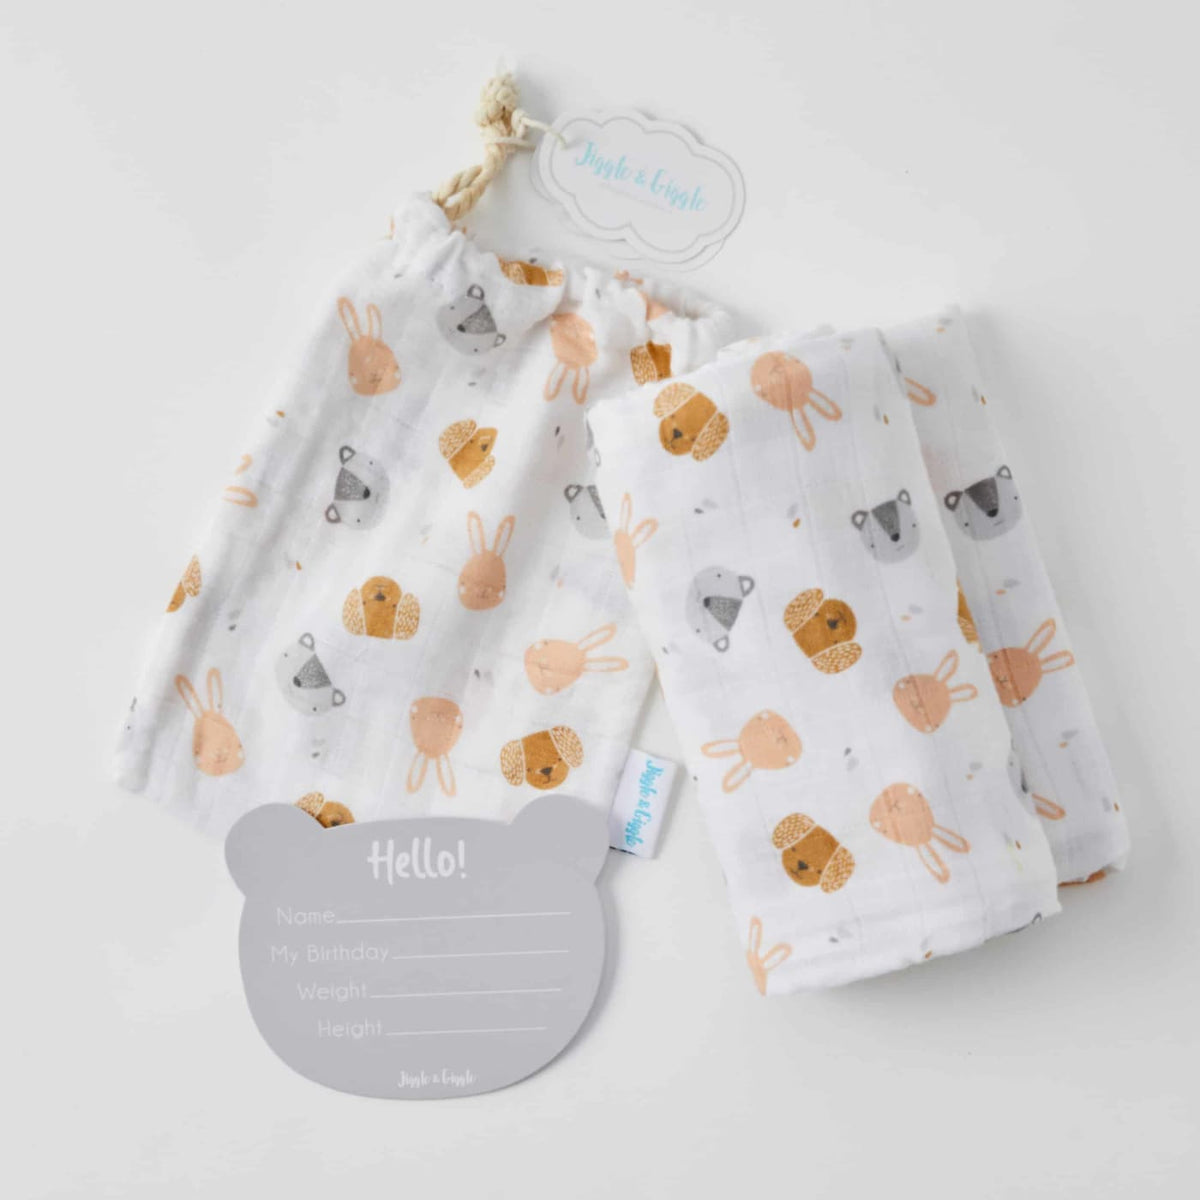 Jiggle &amp; Giggle Cotton Muslin Blanket and Baby Milestone Photo Cards Set - Animal Faces - Animal Faces - NURSERY &amp; BEDTIME - SWADDLES/WRAPS